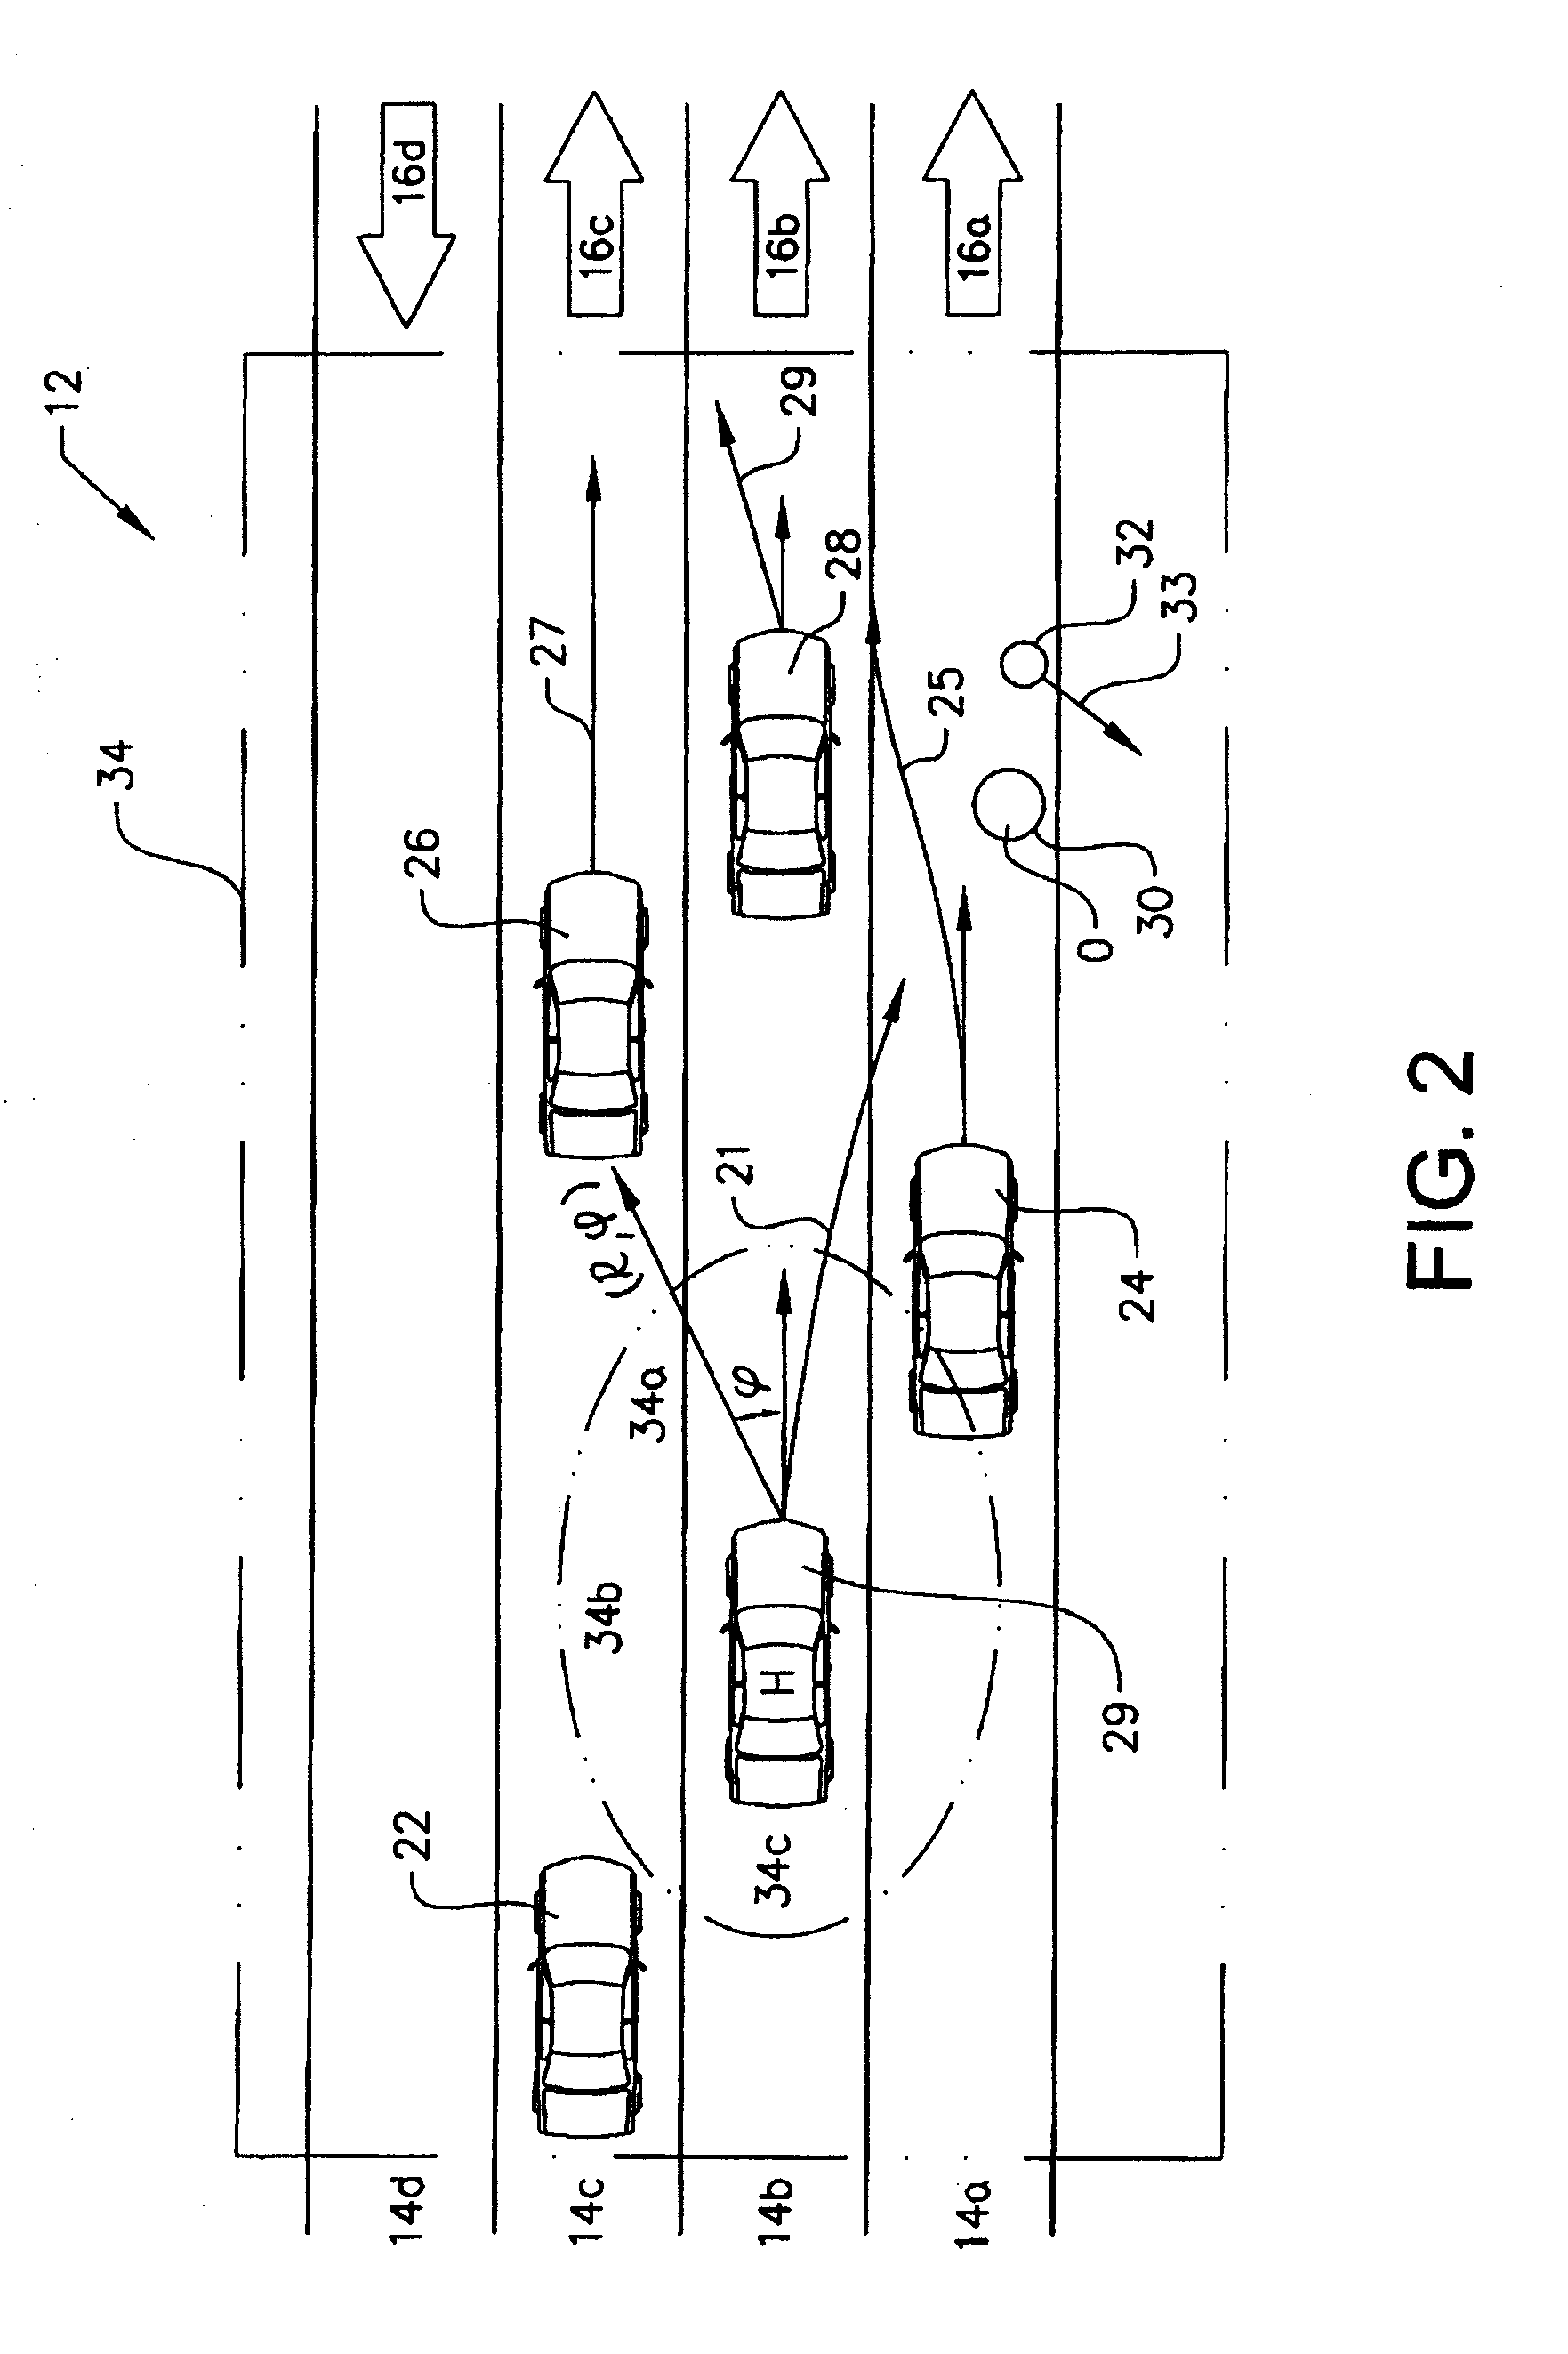 Method and system for collision avoidance